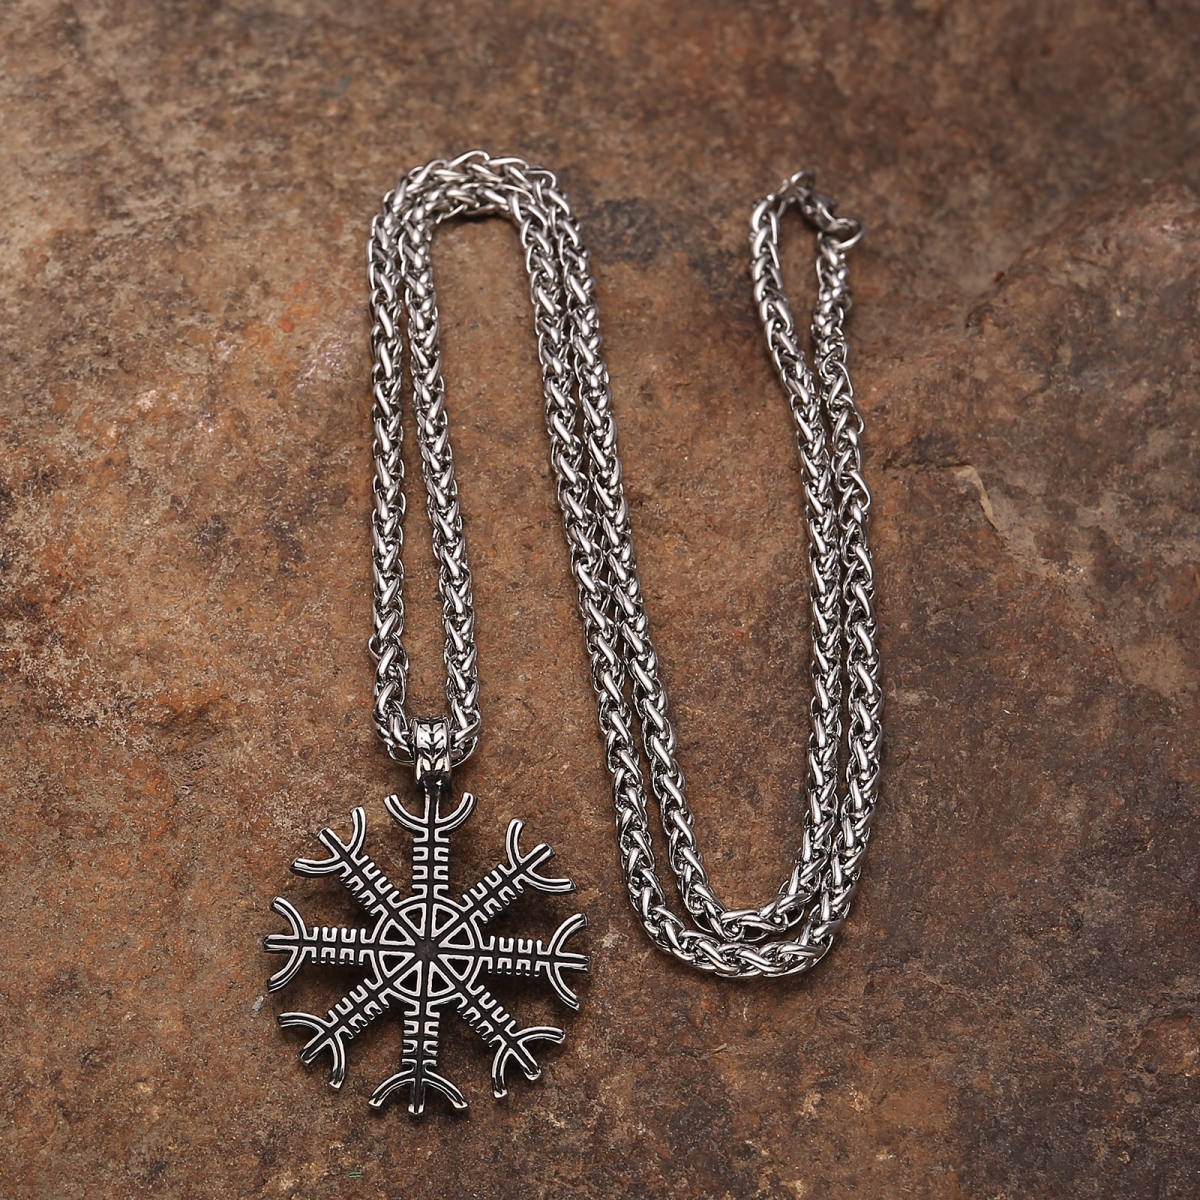 The Helm Of Awe Necklace US$2.9/PC-NORSECOLLECTION- Viking Jewelry,Viking Necklace,Viking Bracelet,Viking Rings,Viking Mugs,Viking Accessories,Viking Crafts